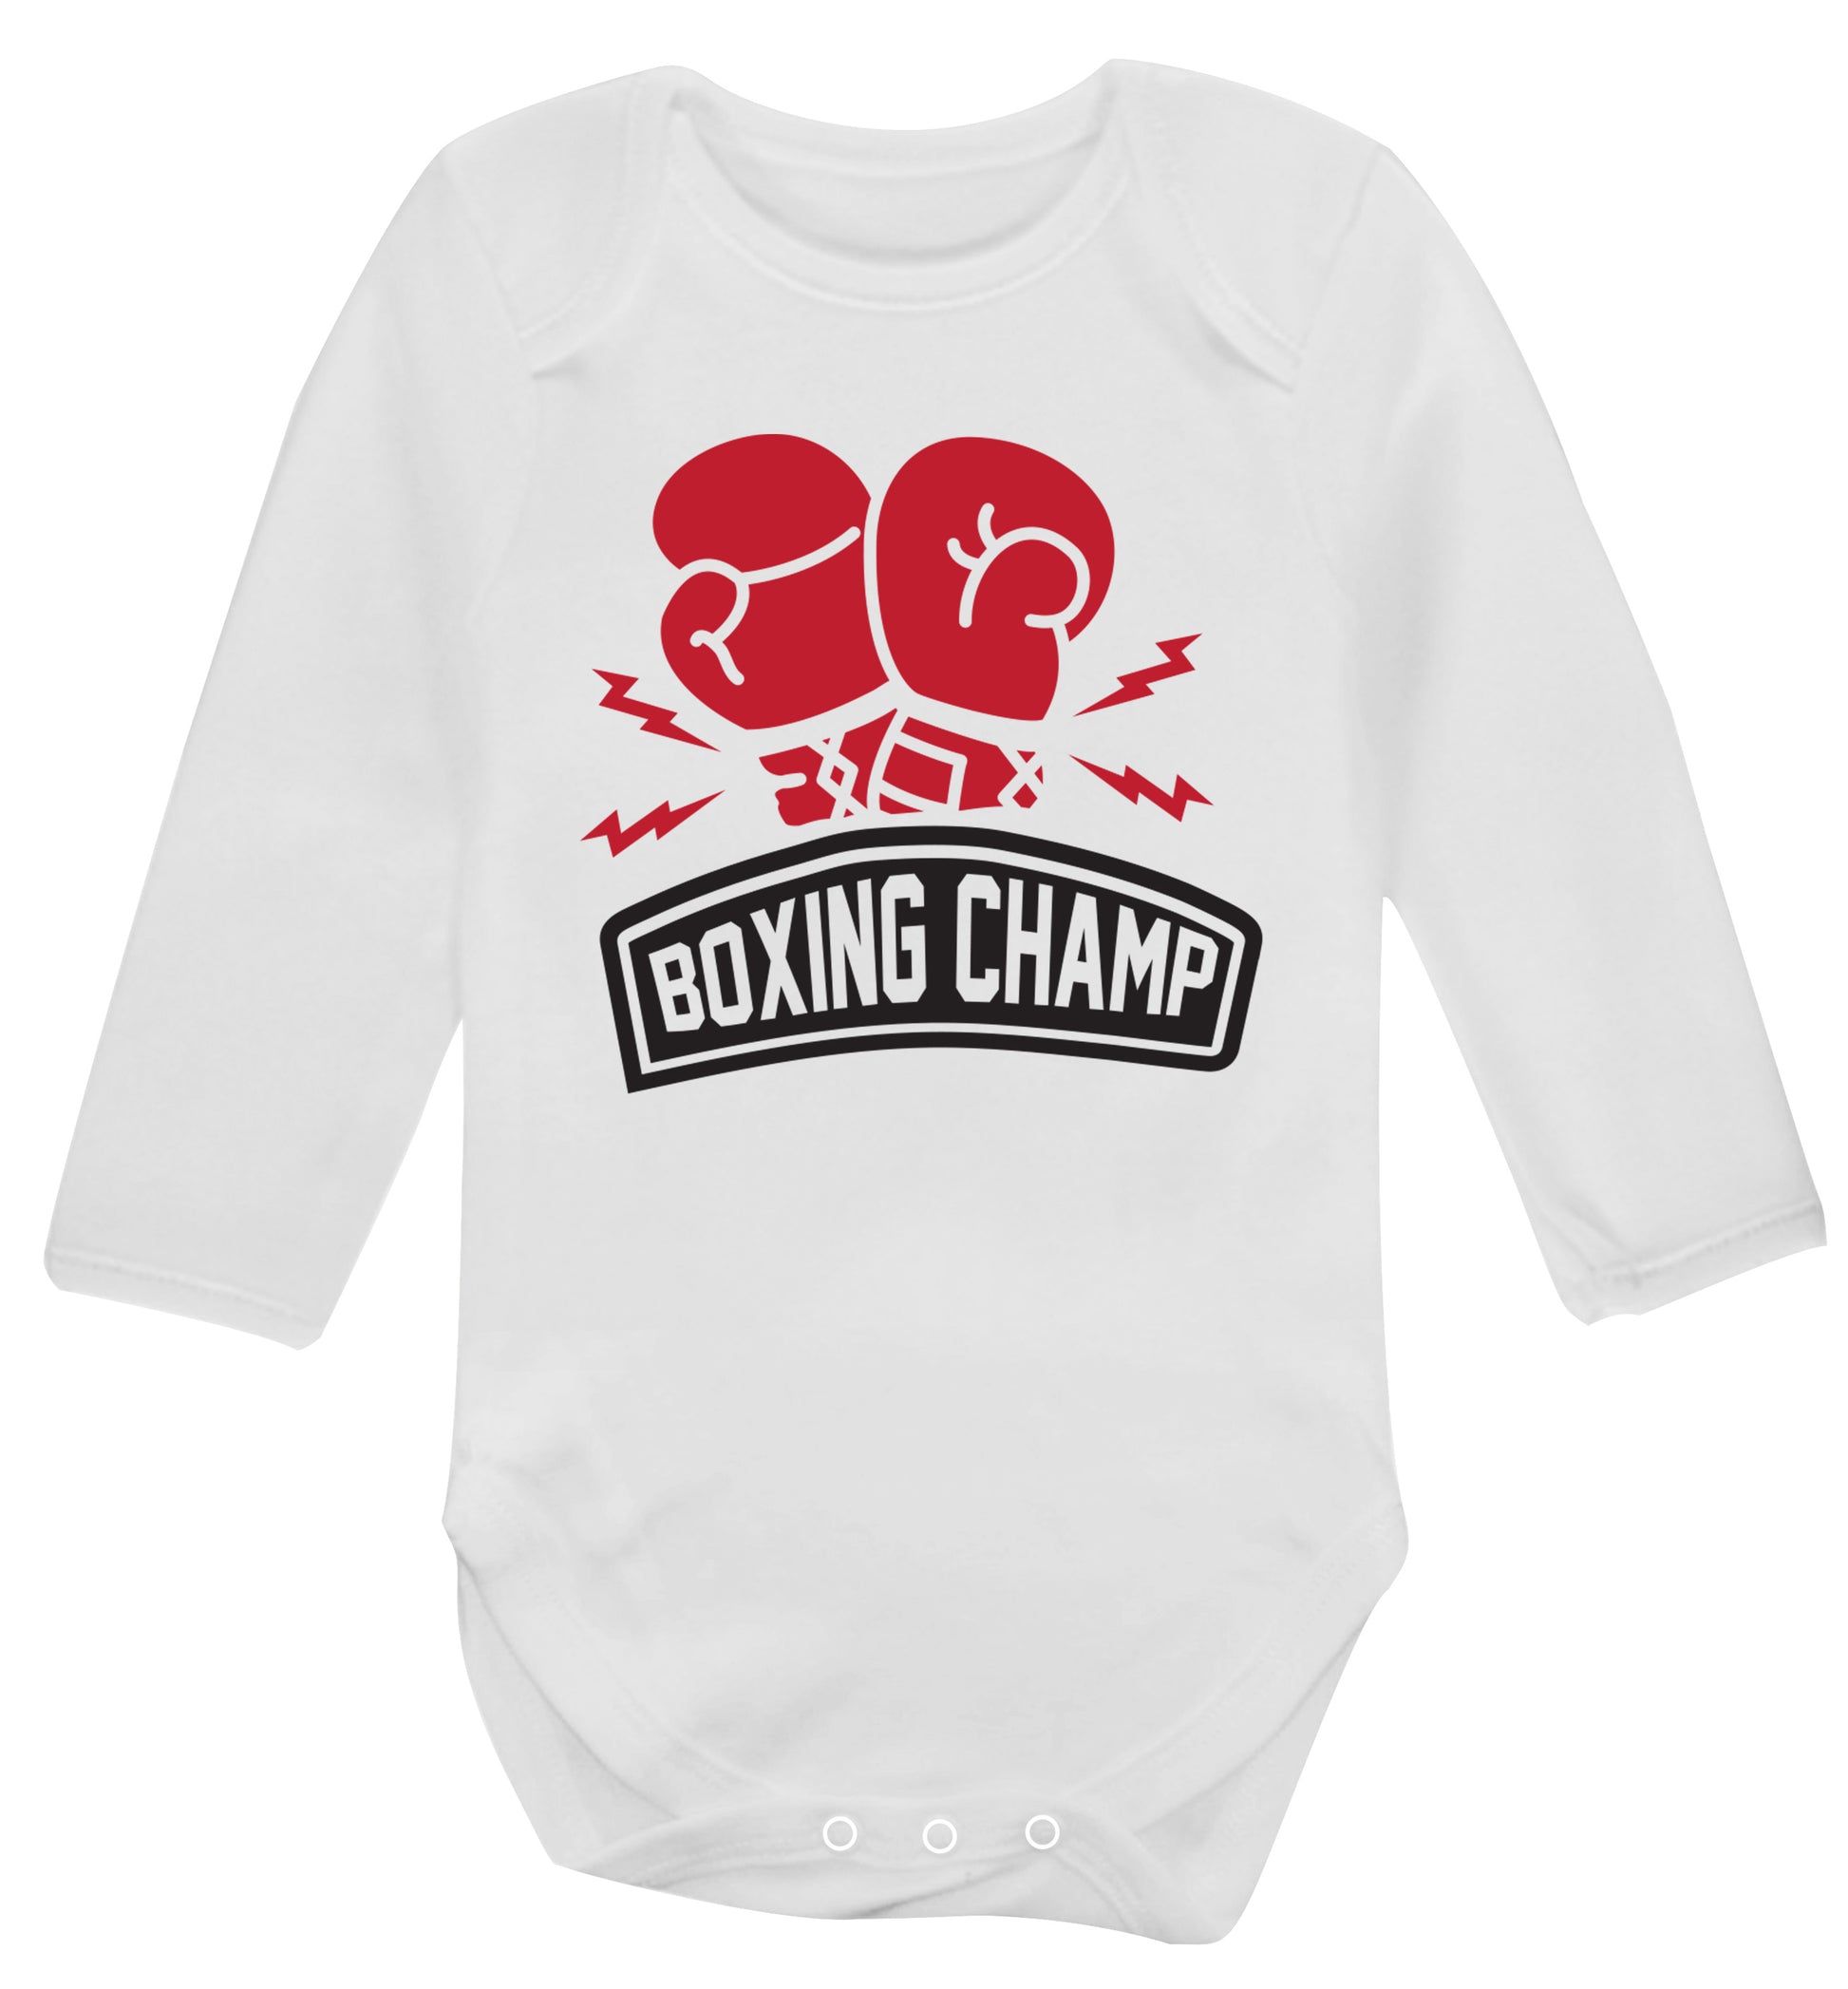 Boxing Champ Baby Vest long sleeved white 6-12 months